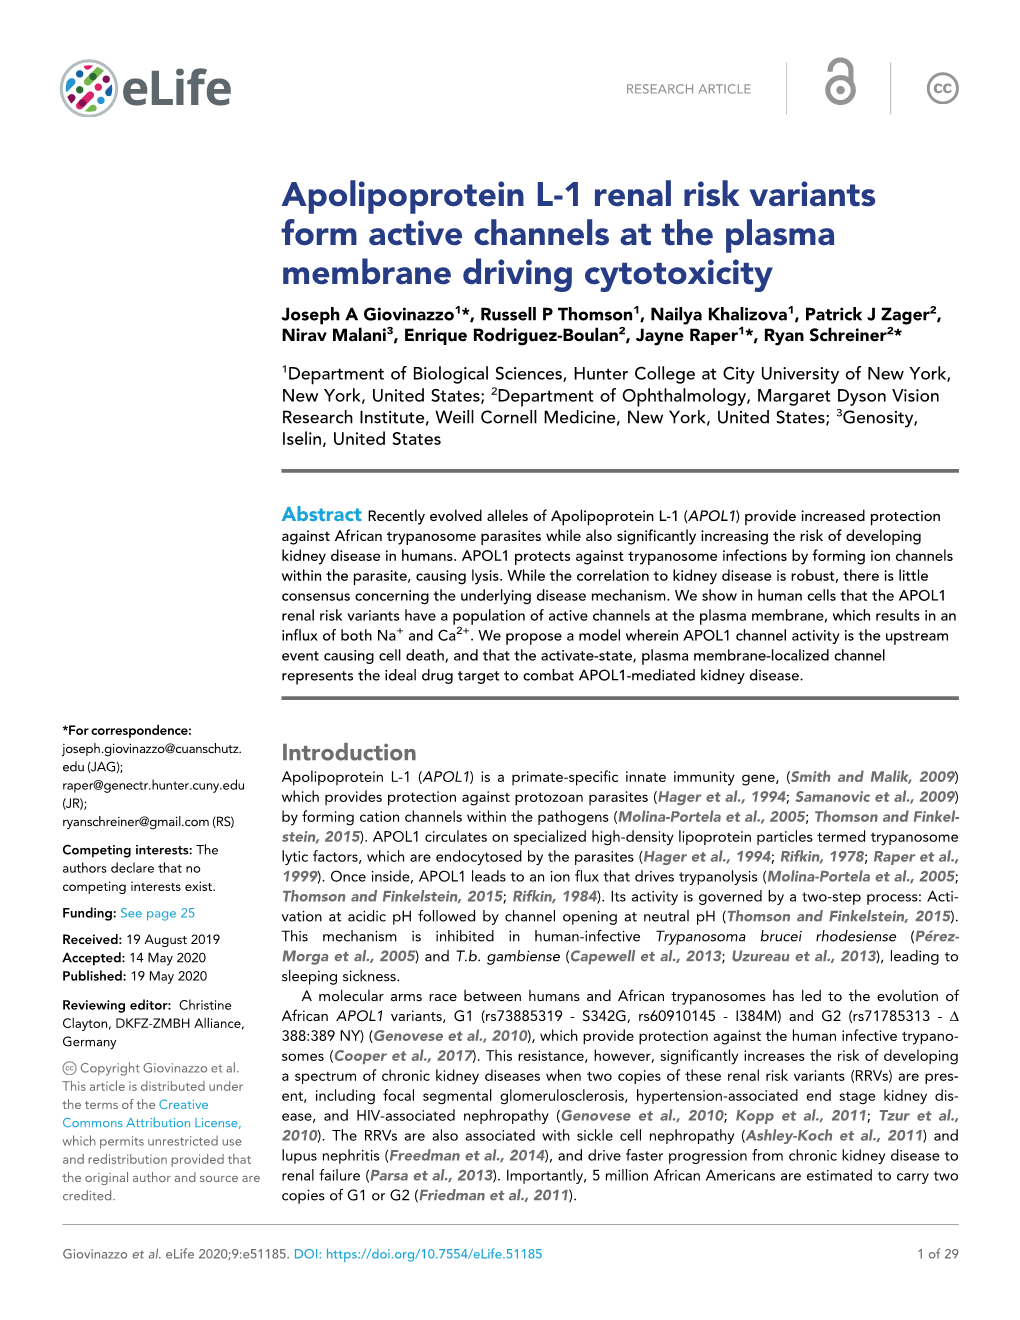 Apolipoprotein L-1 Renal Risk Variants Form Active Channels at the Plasma